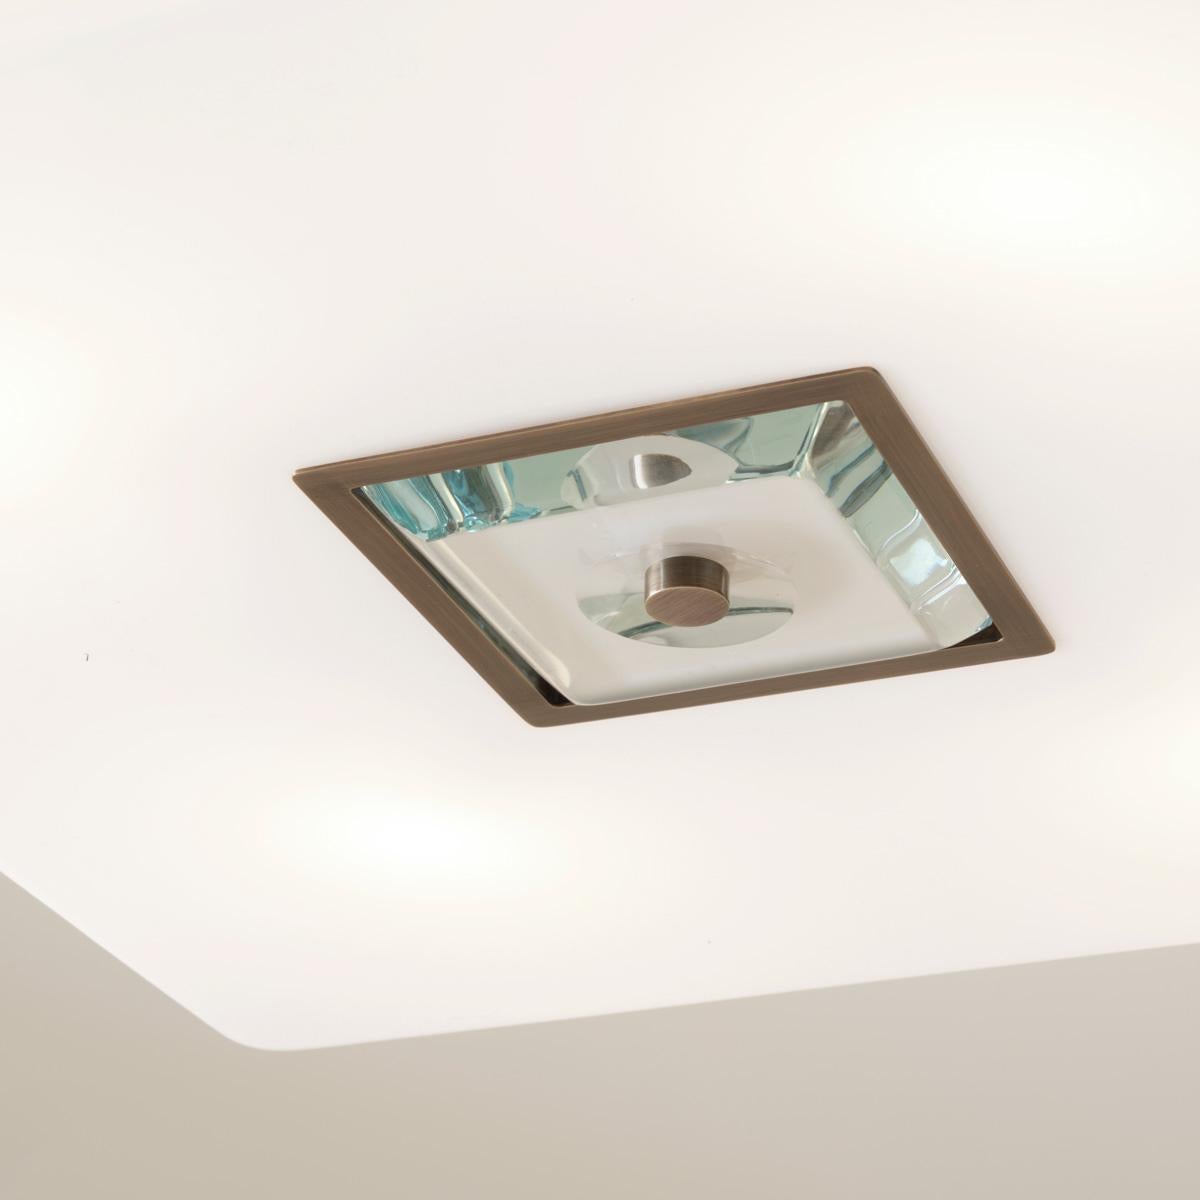 Iris Square Ceiling Light by Gaspare Asaro. Satin Brass Finish In New Condition For Sale In New York, NY